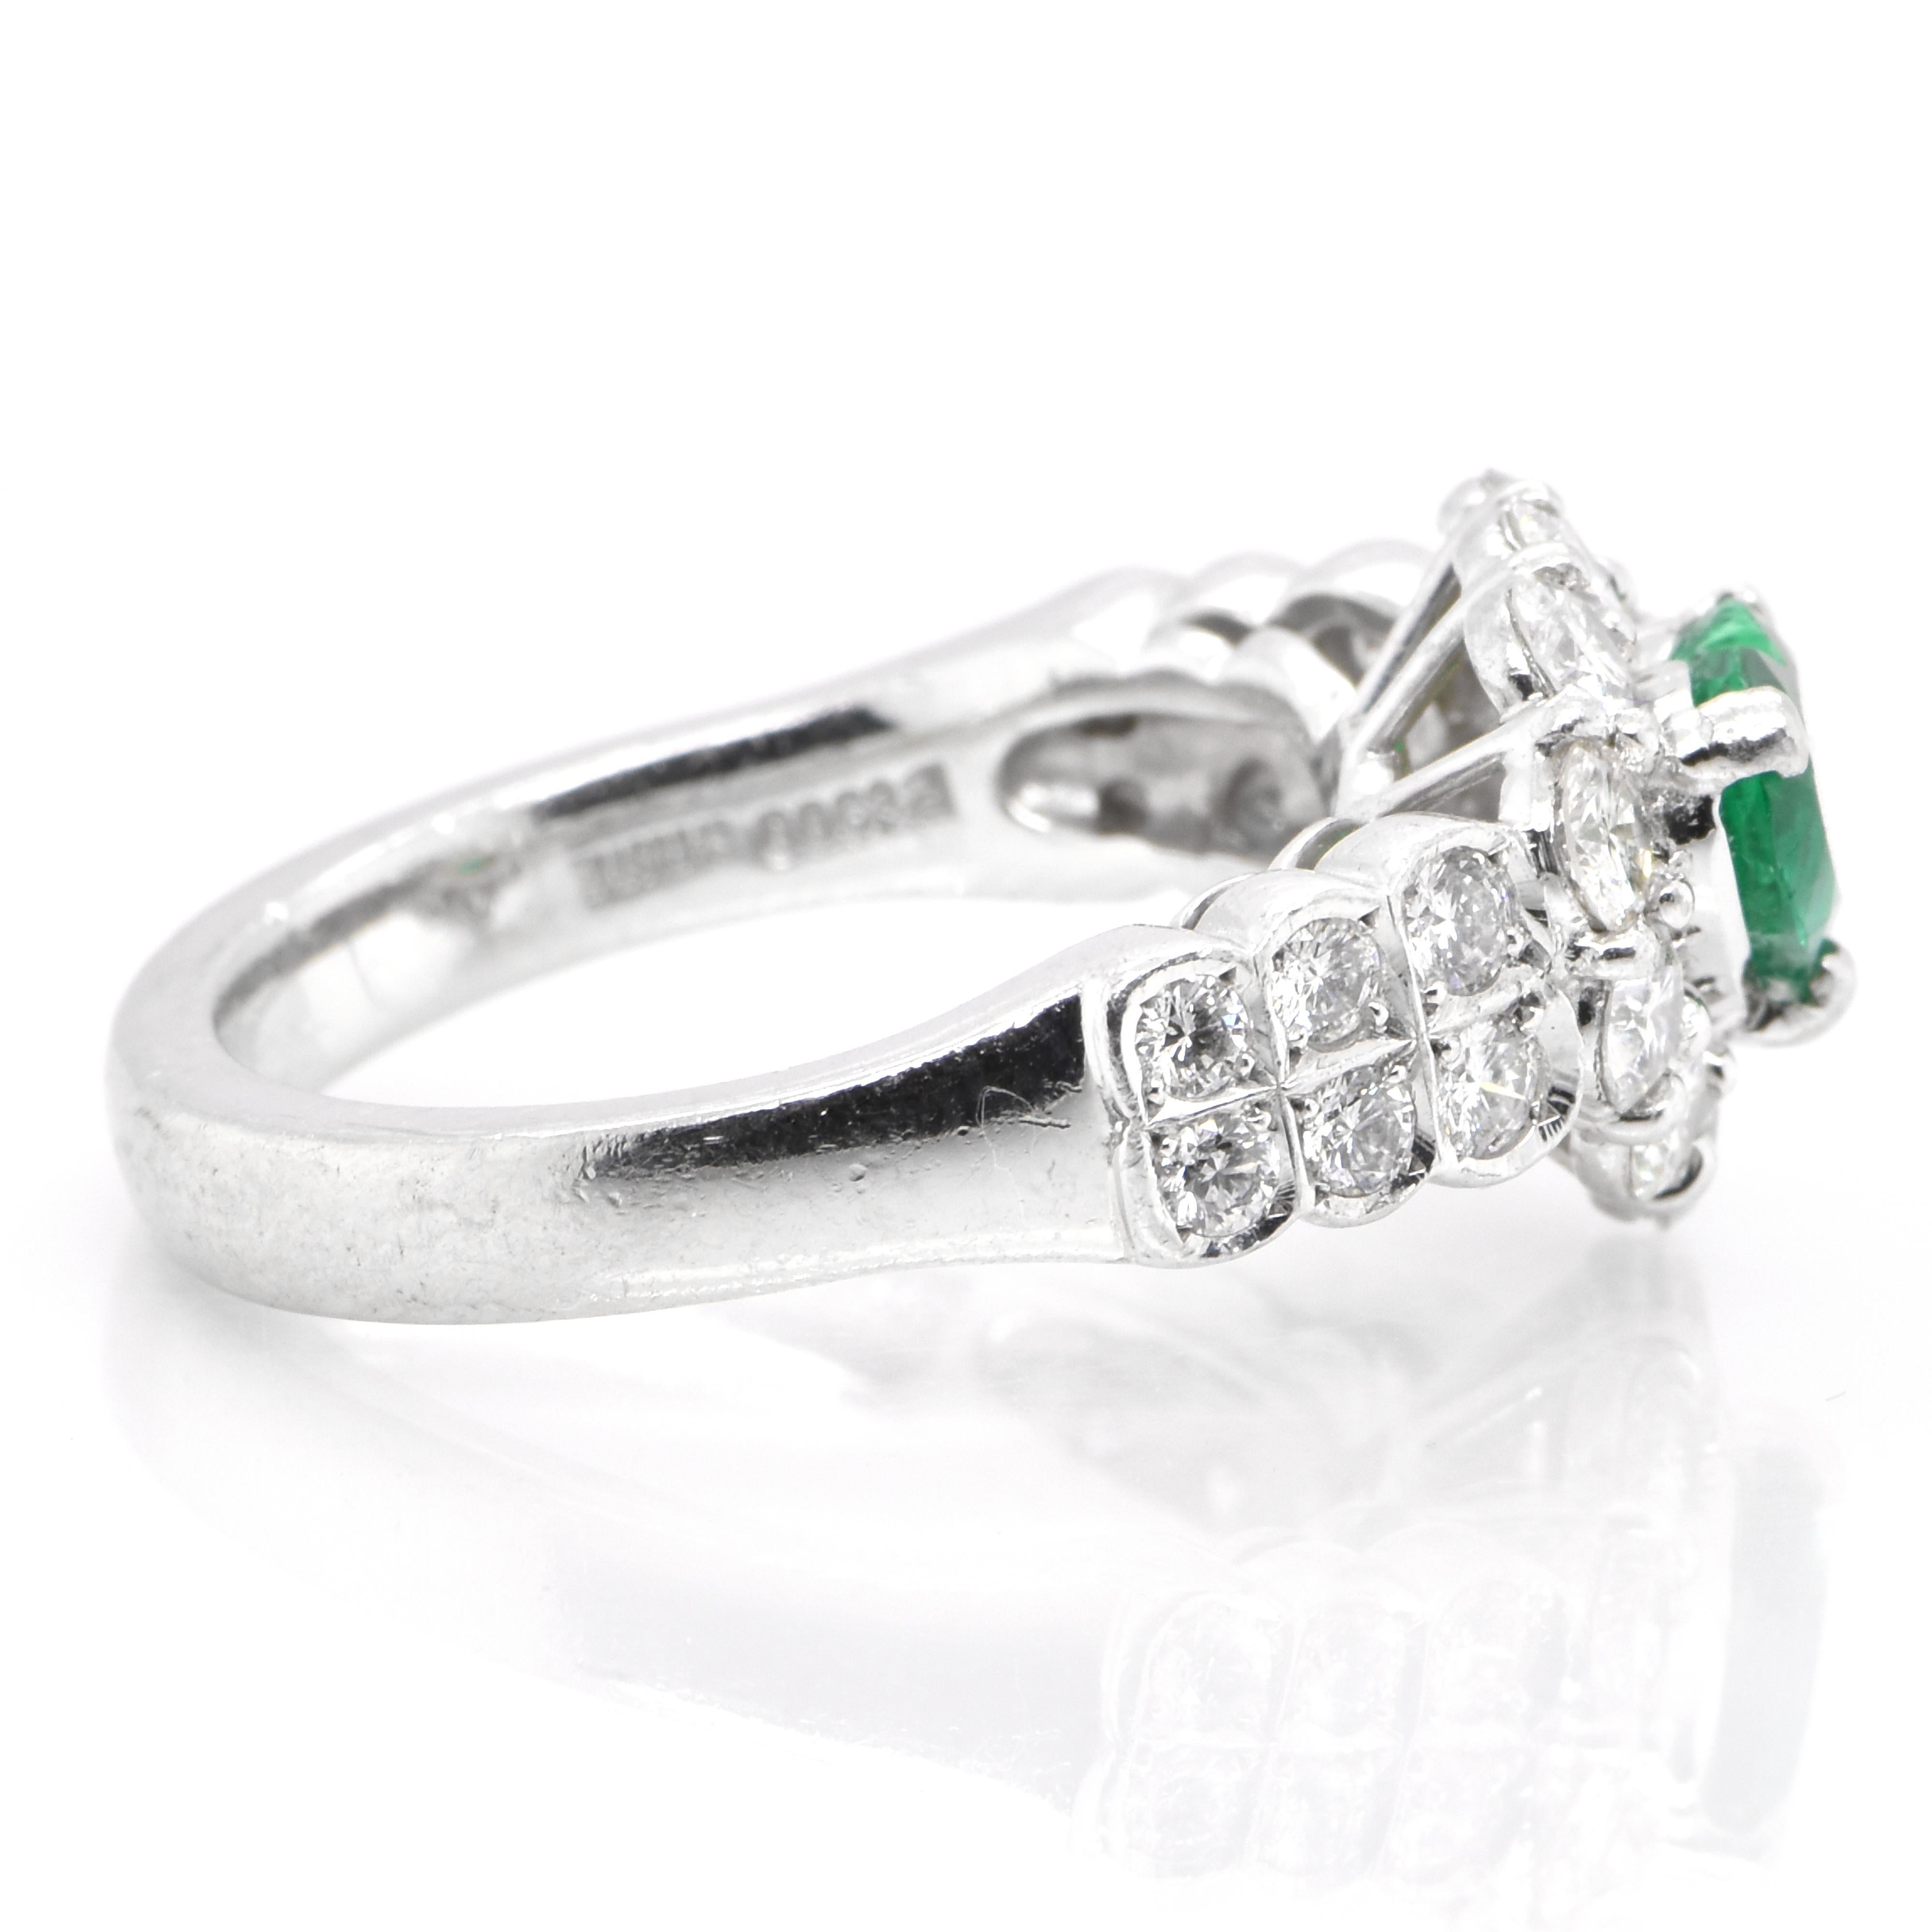 Women's 0.85 Carat Natural Heart Cut Emerald and Diamond Halo Ring Set in Platinum